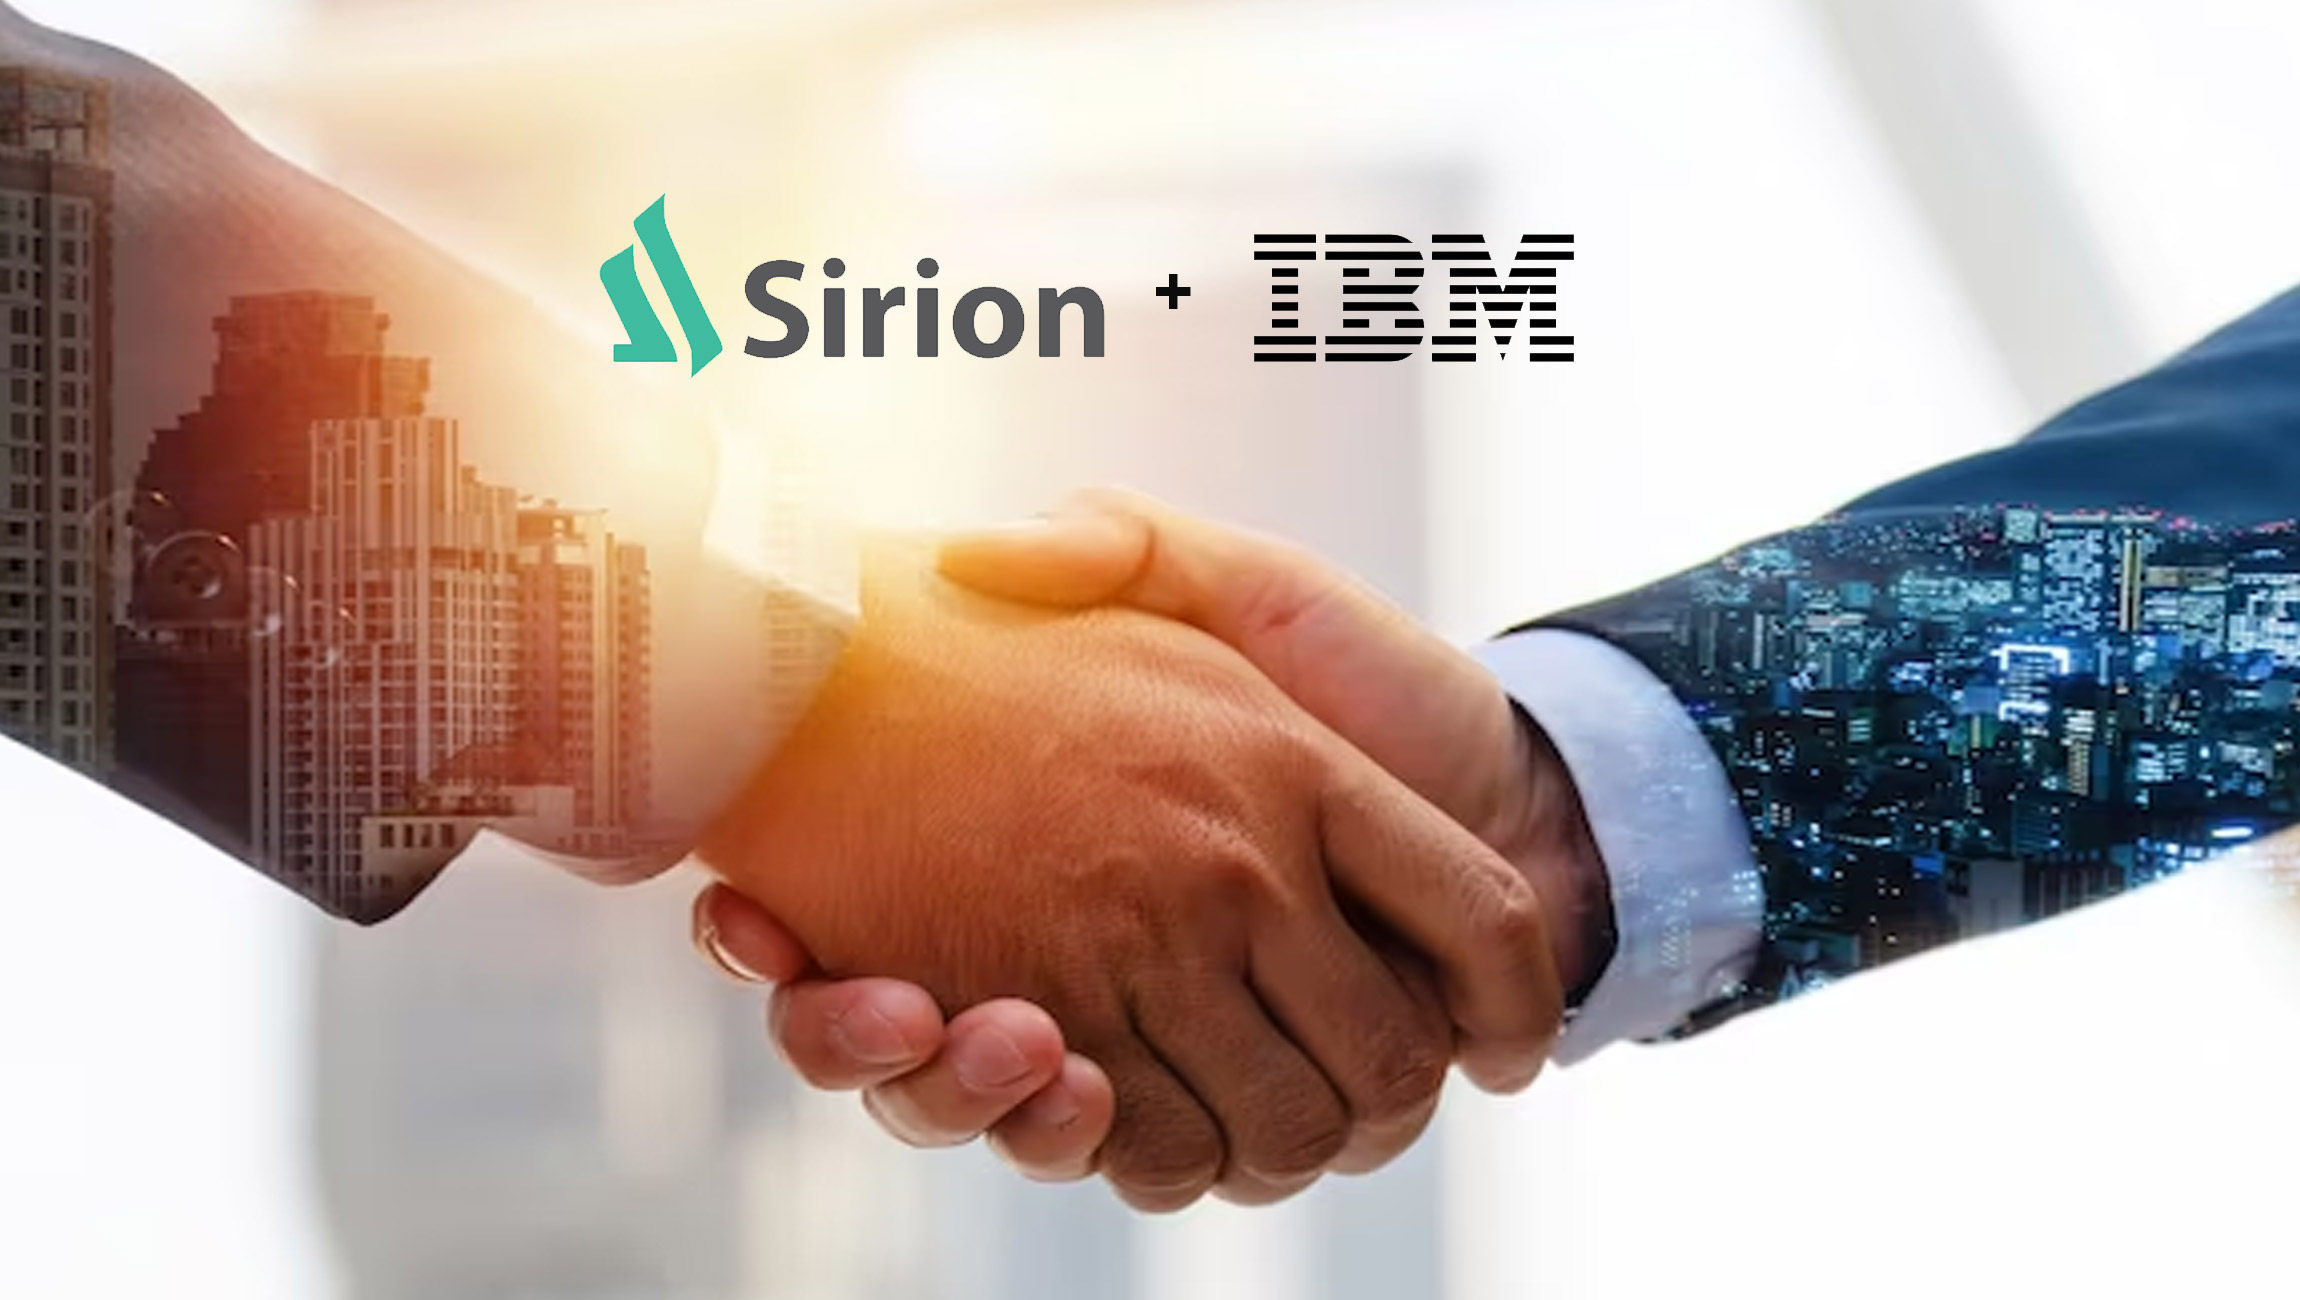 Sirion-Partners-with-IBM-to-Accelerate-Enterprise-Contract-Management-with-AI-Powered-Contract-Lifecycle-Management